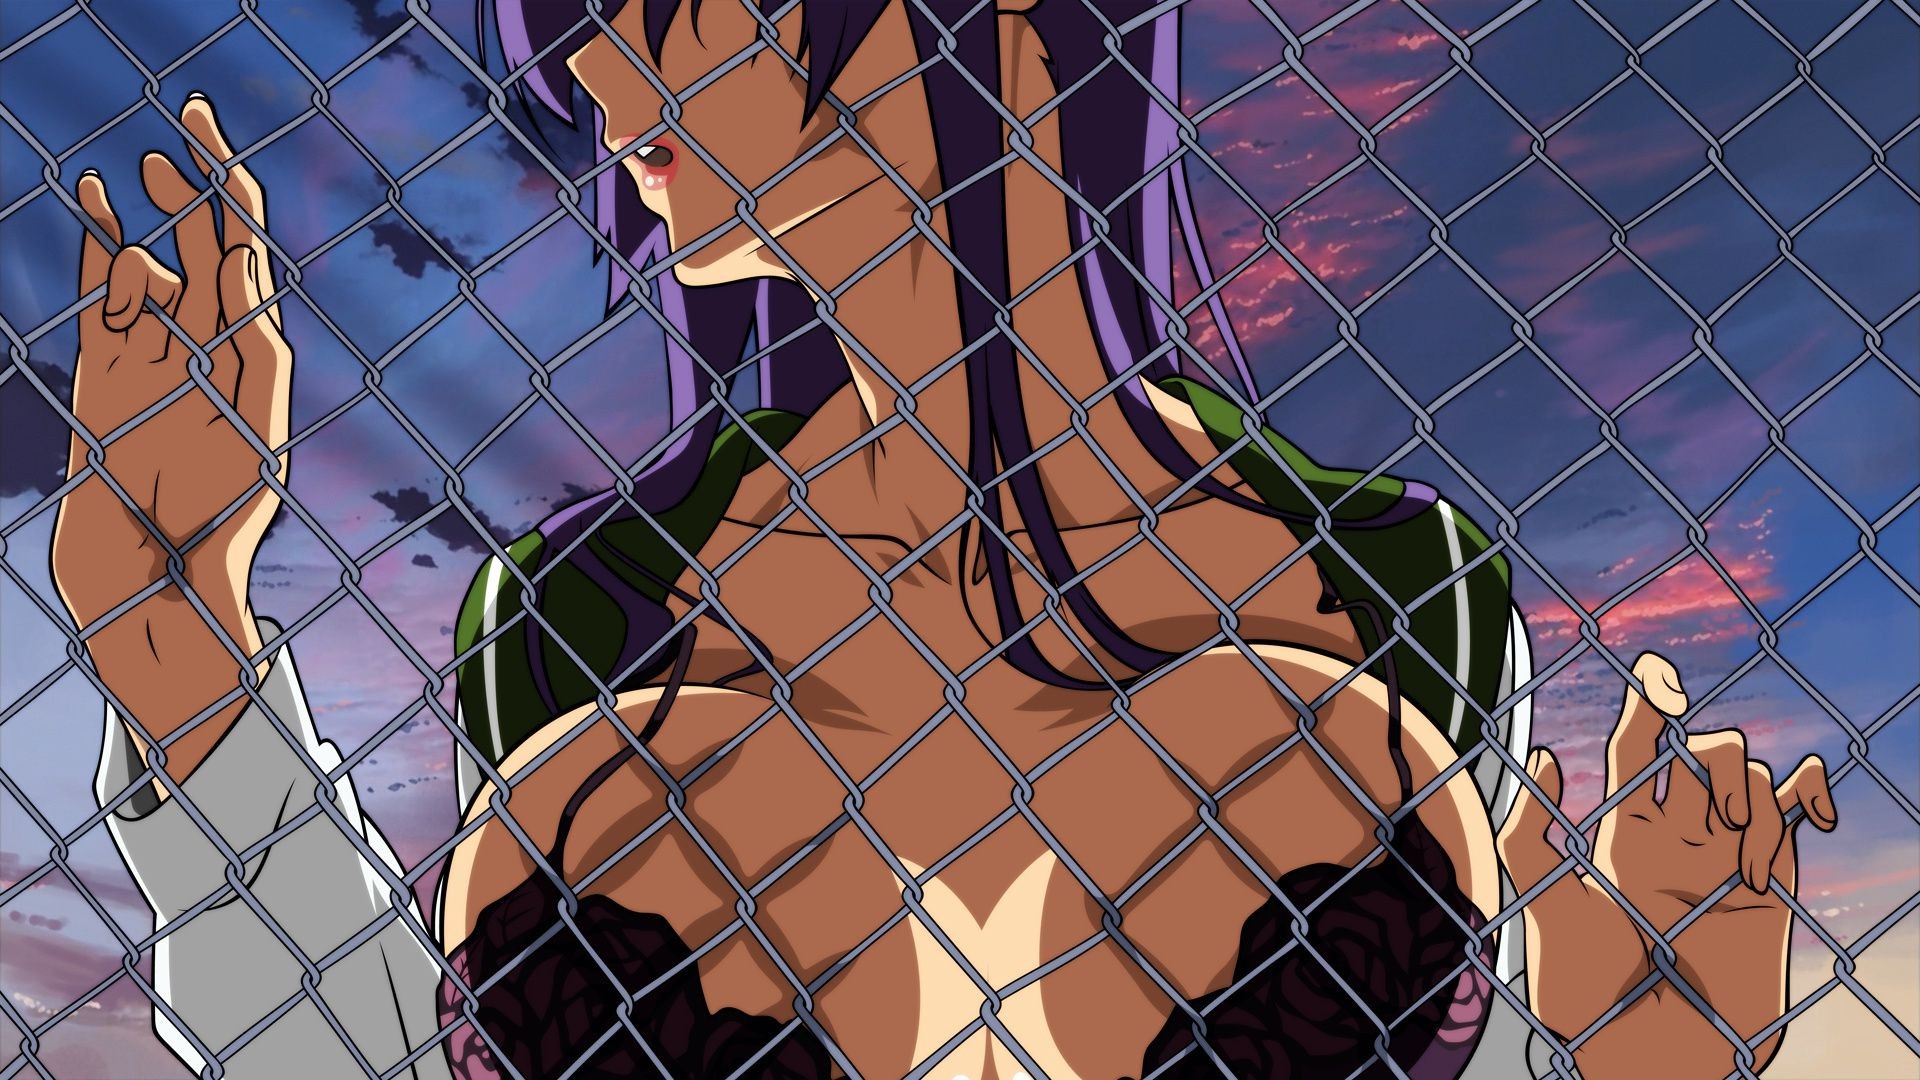 erotica web abstract cage pattern desktop art wire jail design shape fence texture light grid decoration wallpaper basketball color graphic ball